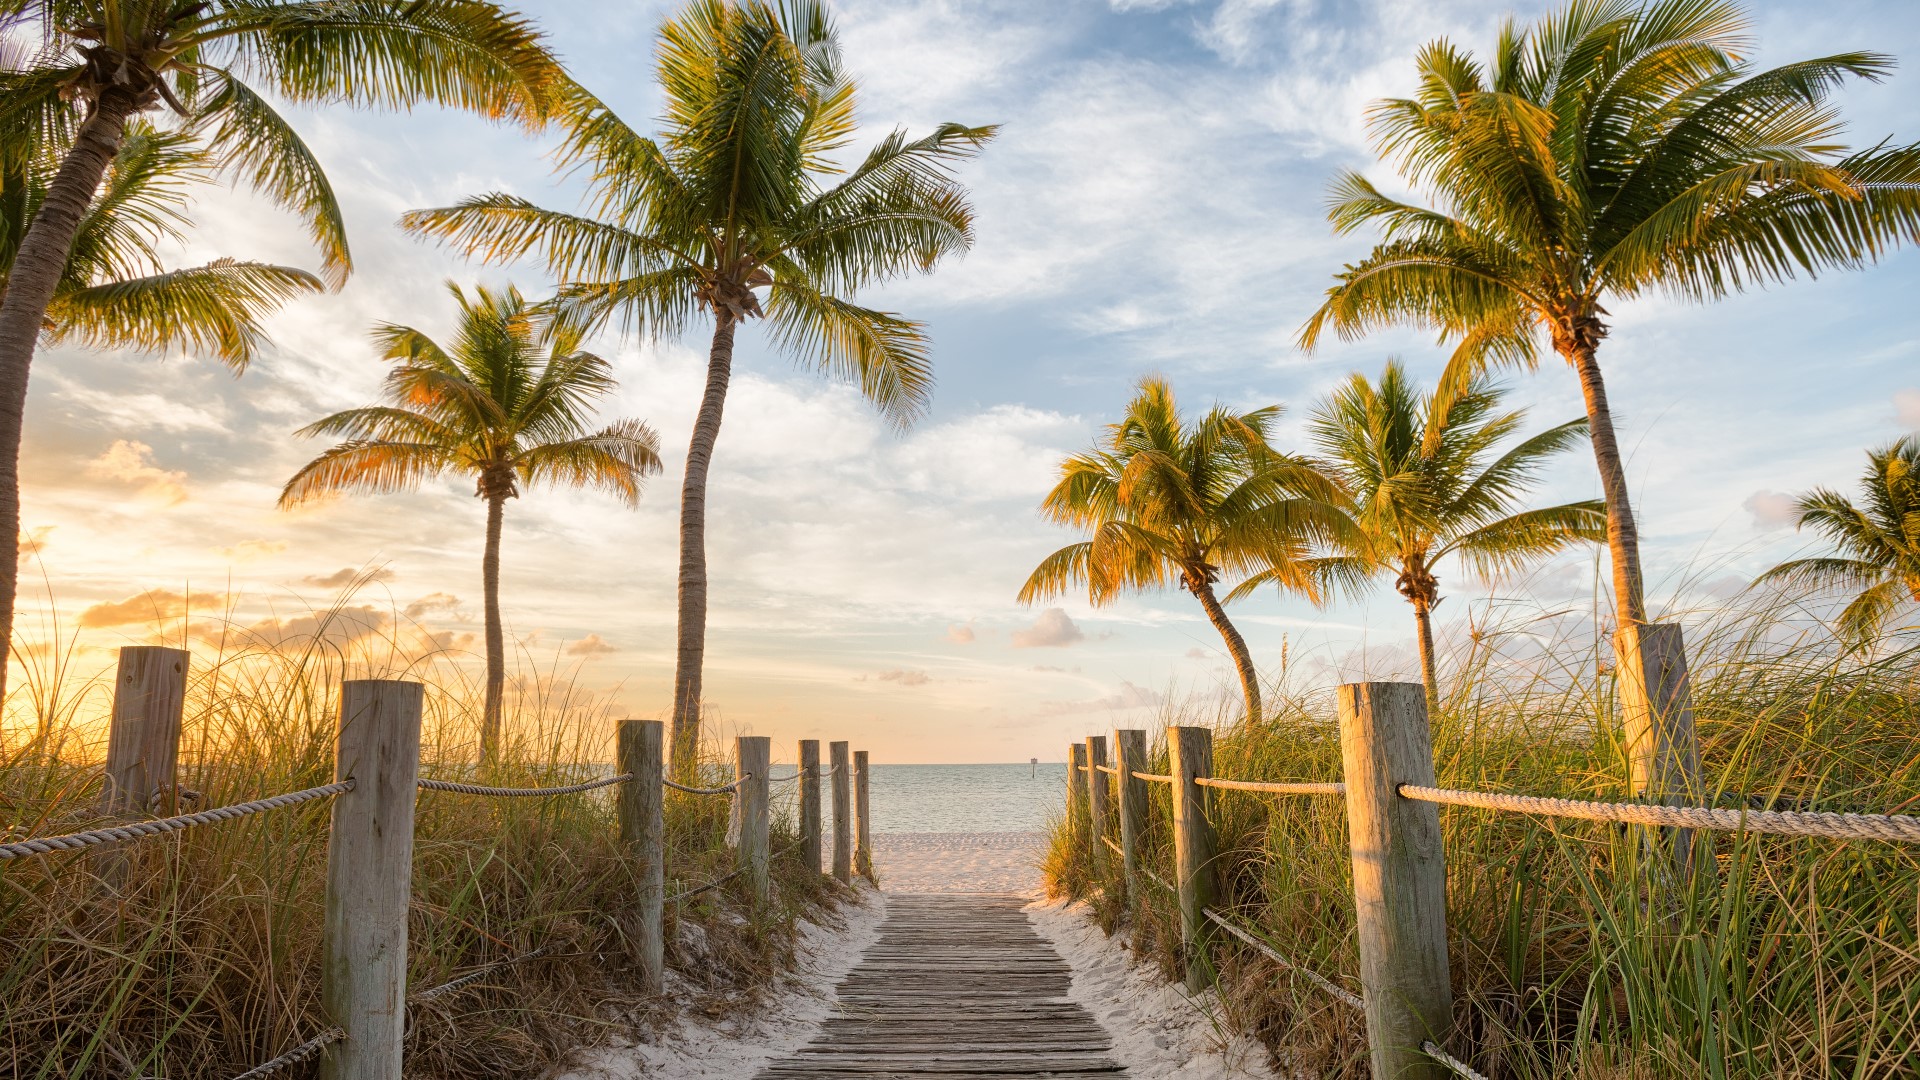 Sponsored by: The Palm Beaches. Lindsey Wiegmann, Dir. of PR, at Discover The Palm Beaches shares why it's a great place to visit in winter. ThePalmBeaches.com